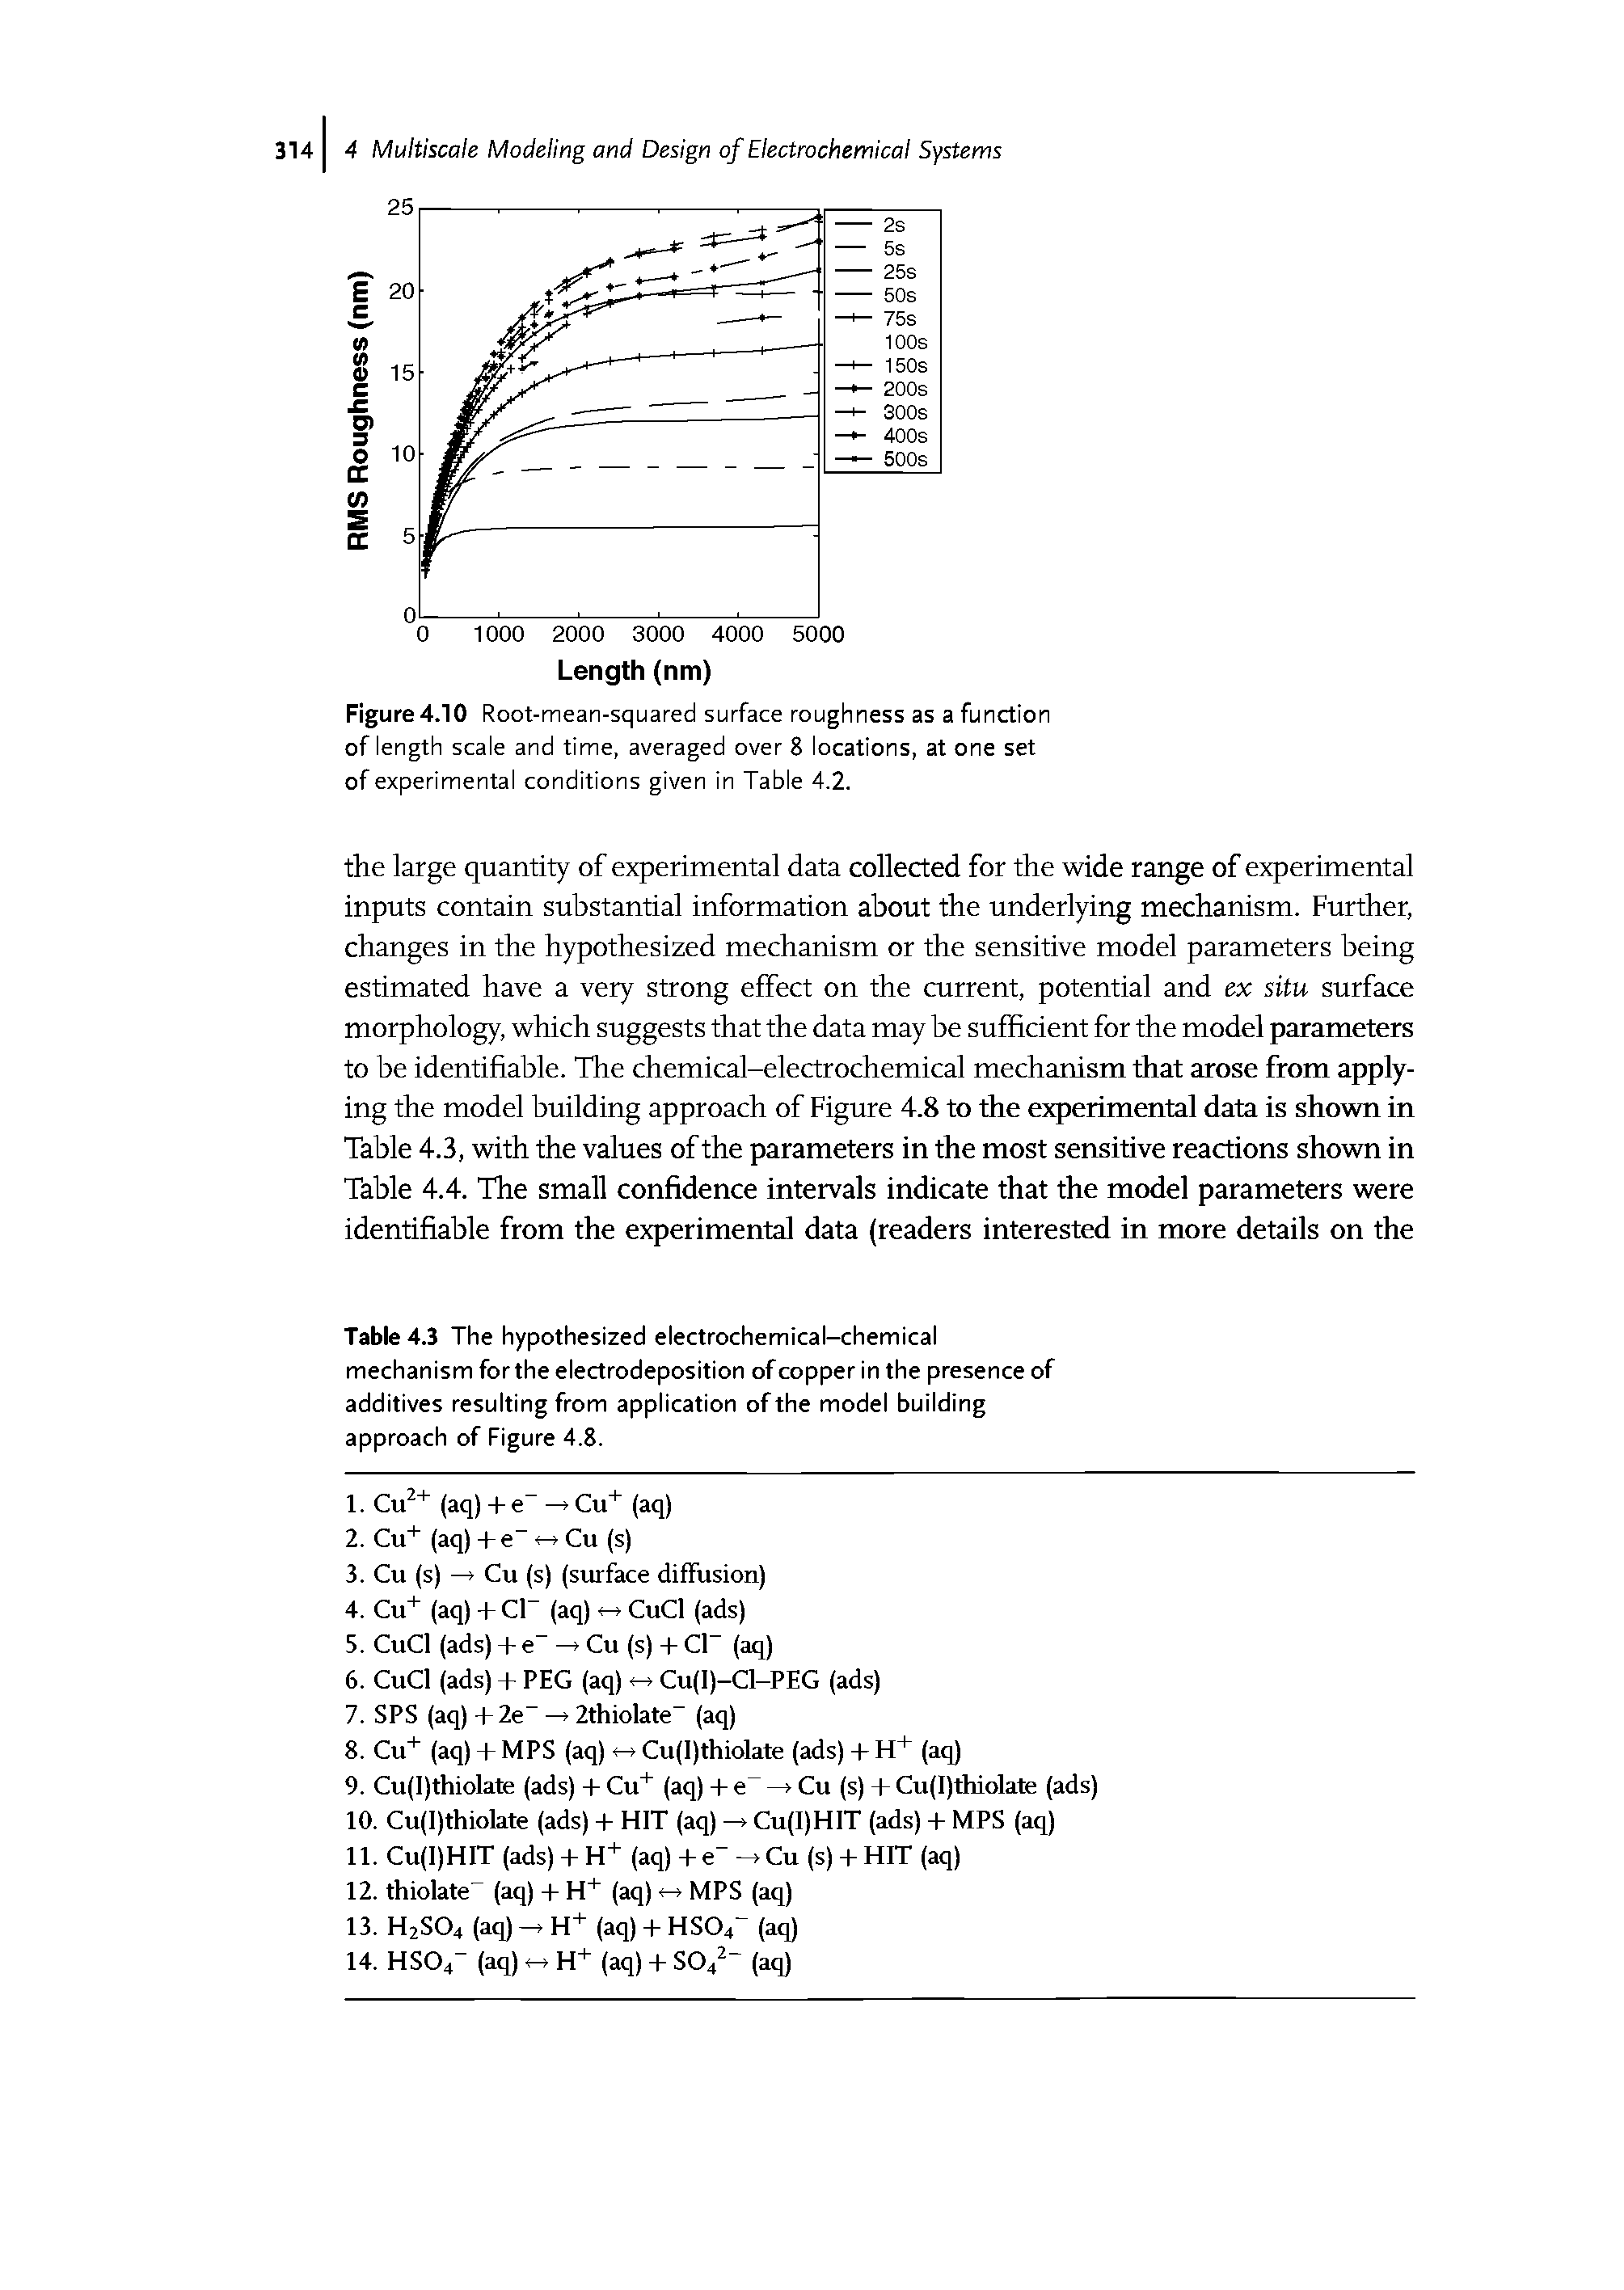 Table 4.3 The hypothesized electrochemical-chemical mechanism for the electrodeposition of copper in the presence of additives resulting from application of the model building approach of Figure 4.8.